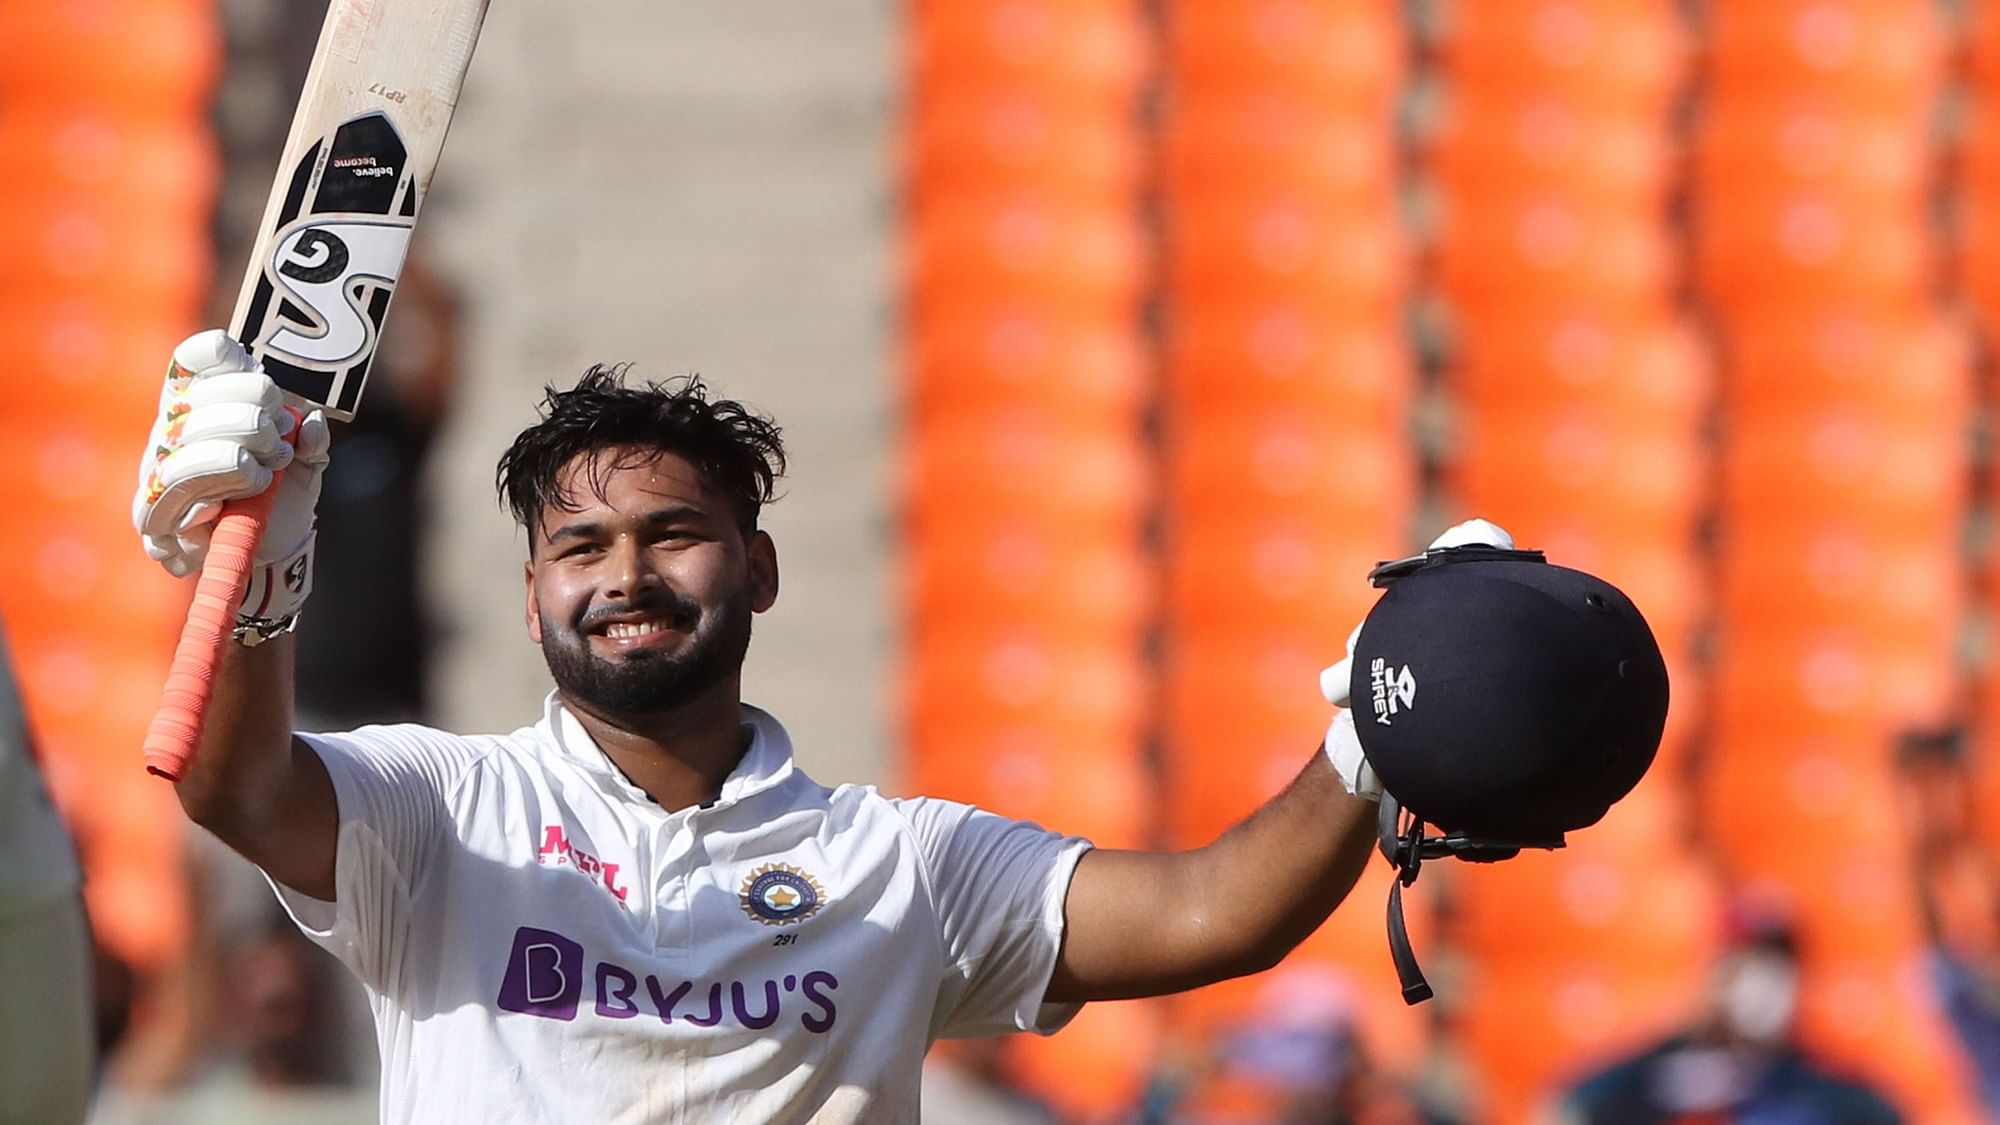 Rishabh Pant finished as the third highest-scorer of the India vs England Test series with 270 runs from 6 innings.